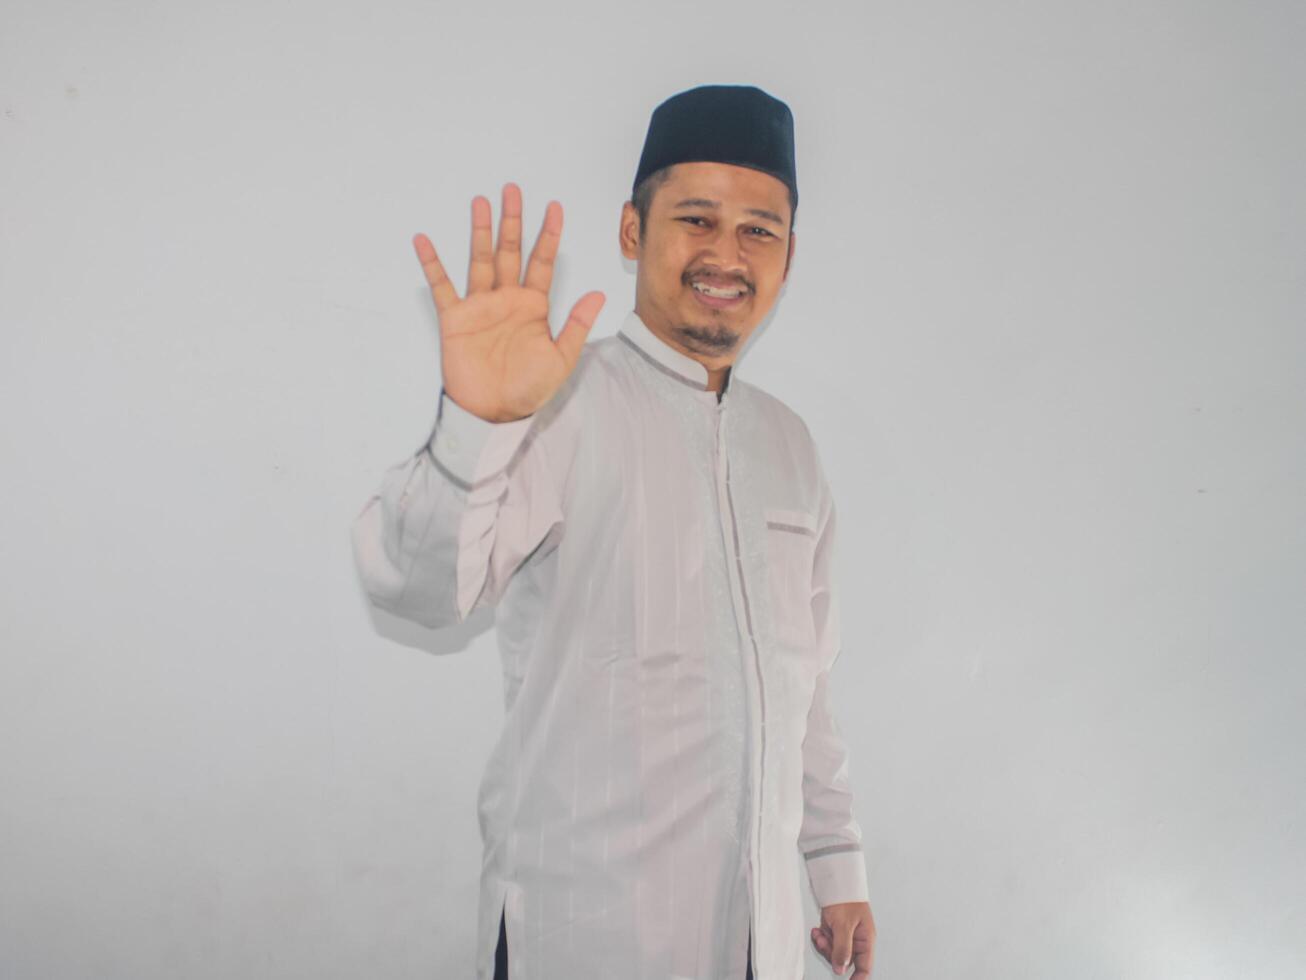 Moslem Asian man showing happy expression when waving hand to greet someone photo